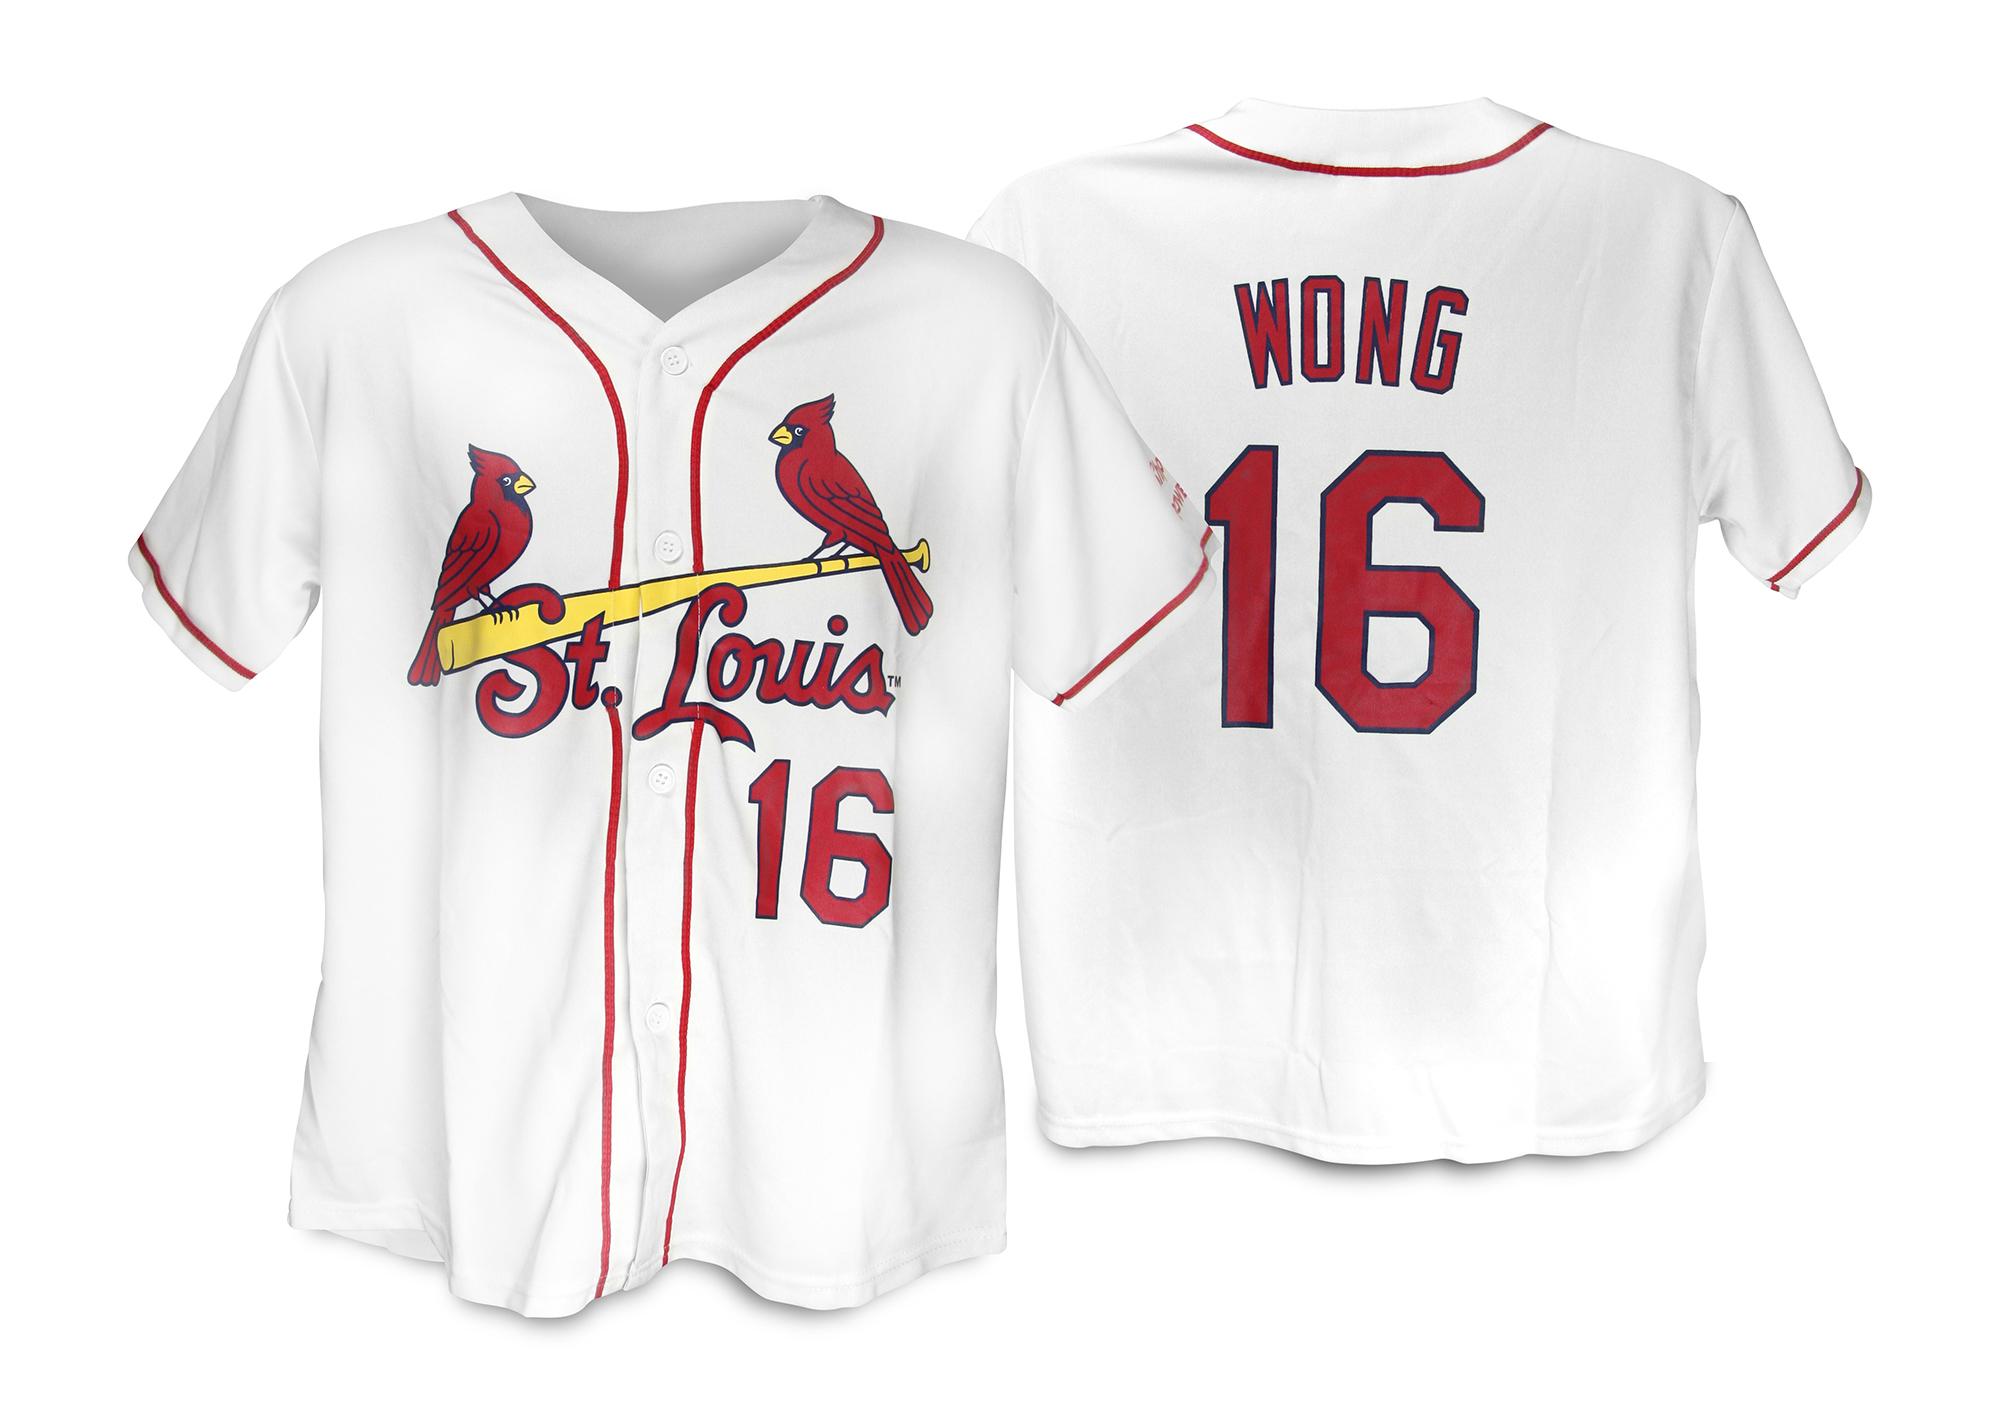 St. Louis Cardinals on X: Today's #CardsPromo: All ticketed- fans